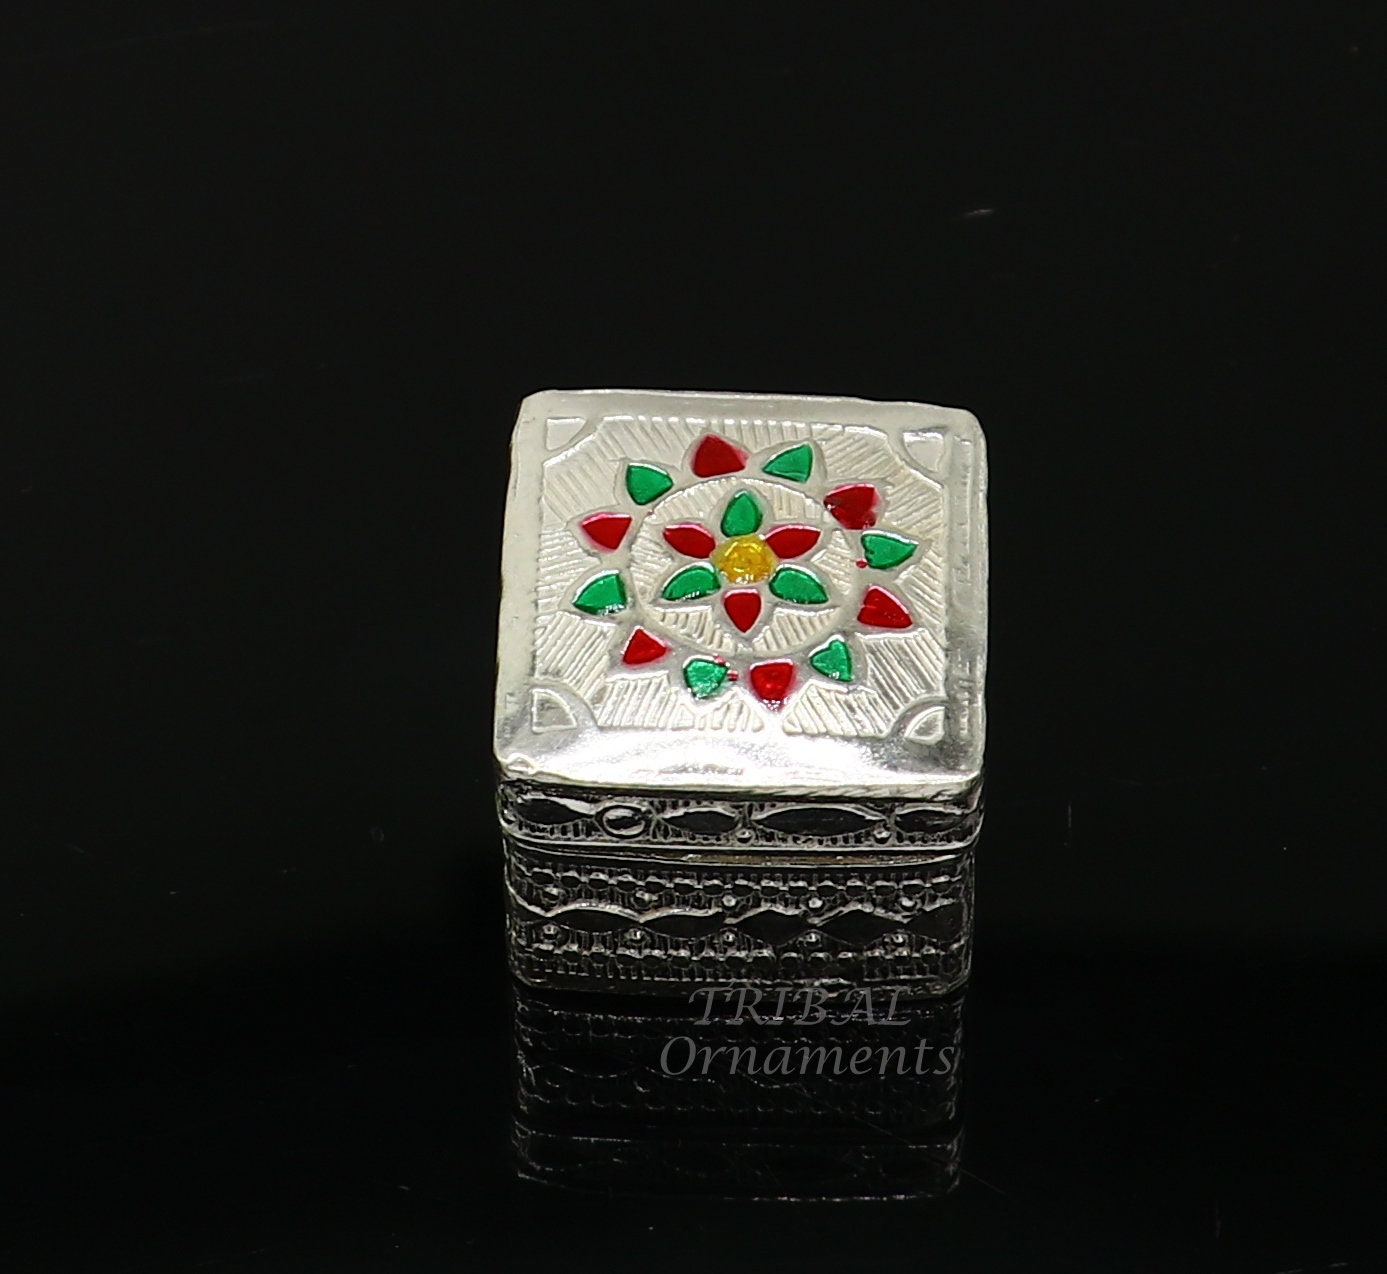 925 sterling silver trinket box, kajal box/casket box bridal square shape box collection, container box, eyeliner box gifting art stb723 - TRIBAL ORNAMENTS